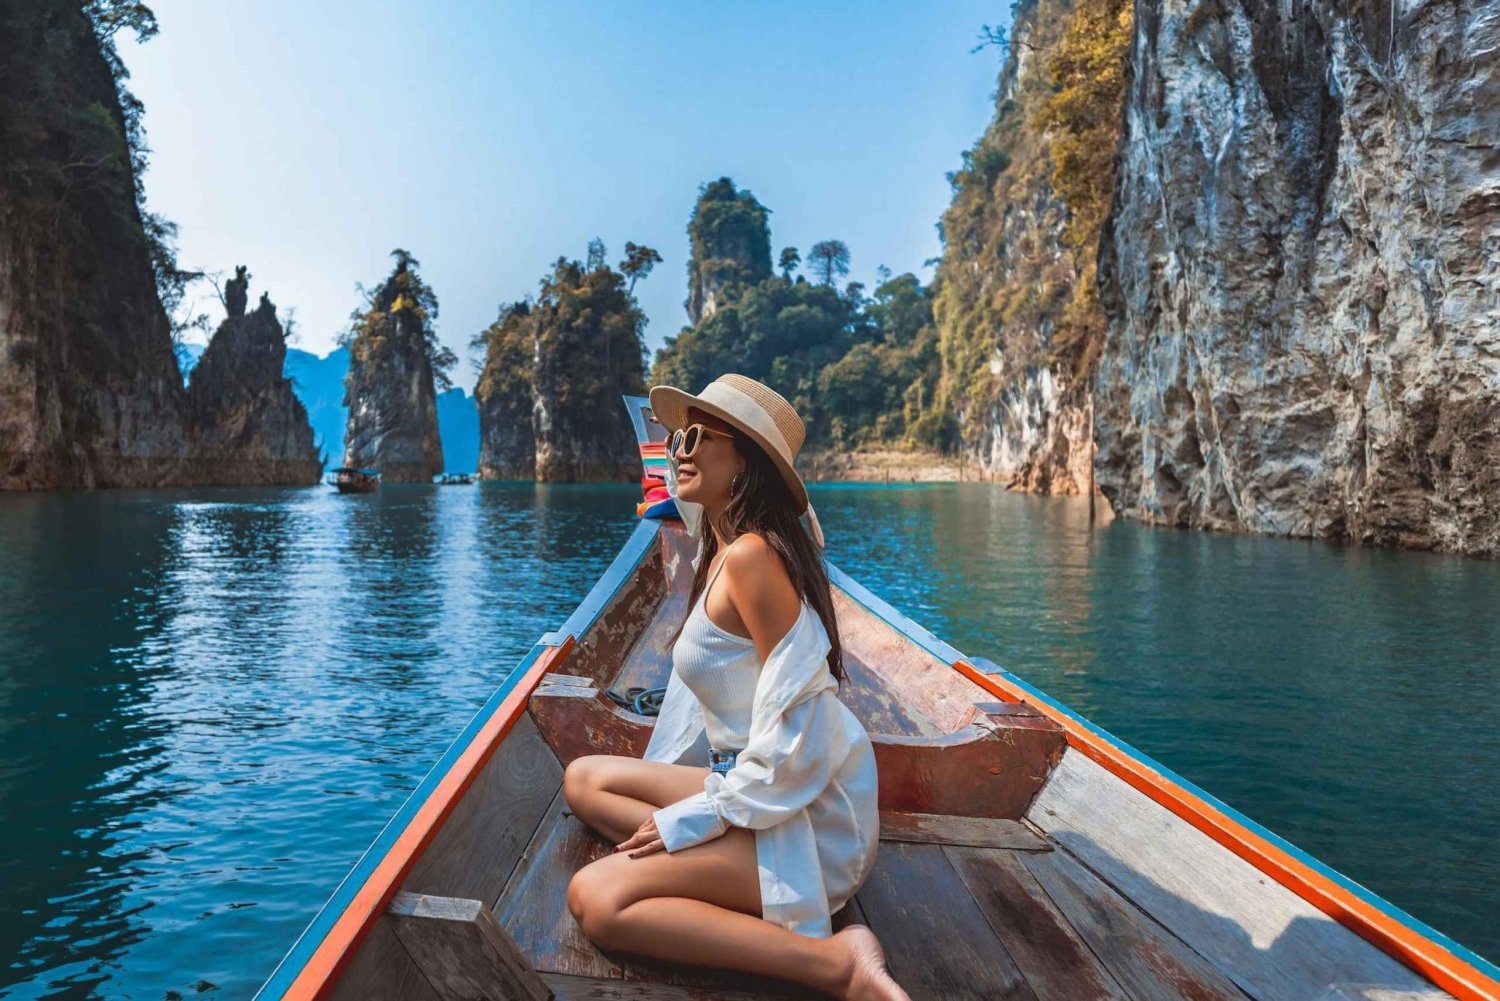 From Phuket: Private Day Trip to Khao Sok with Longtail Tour